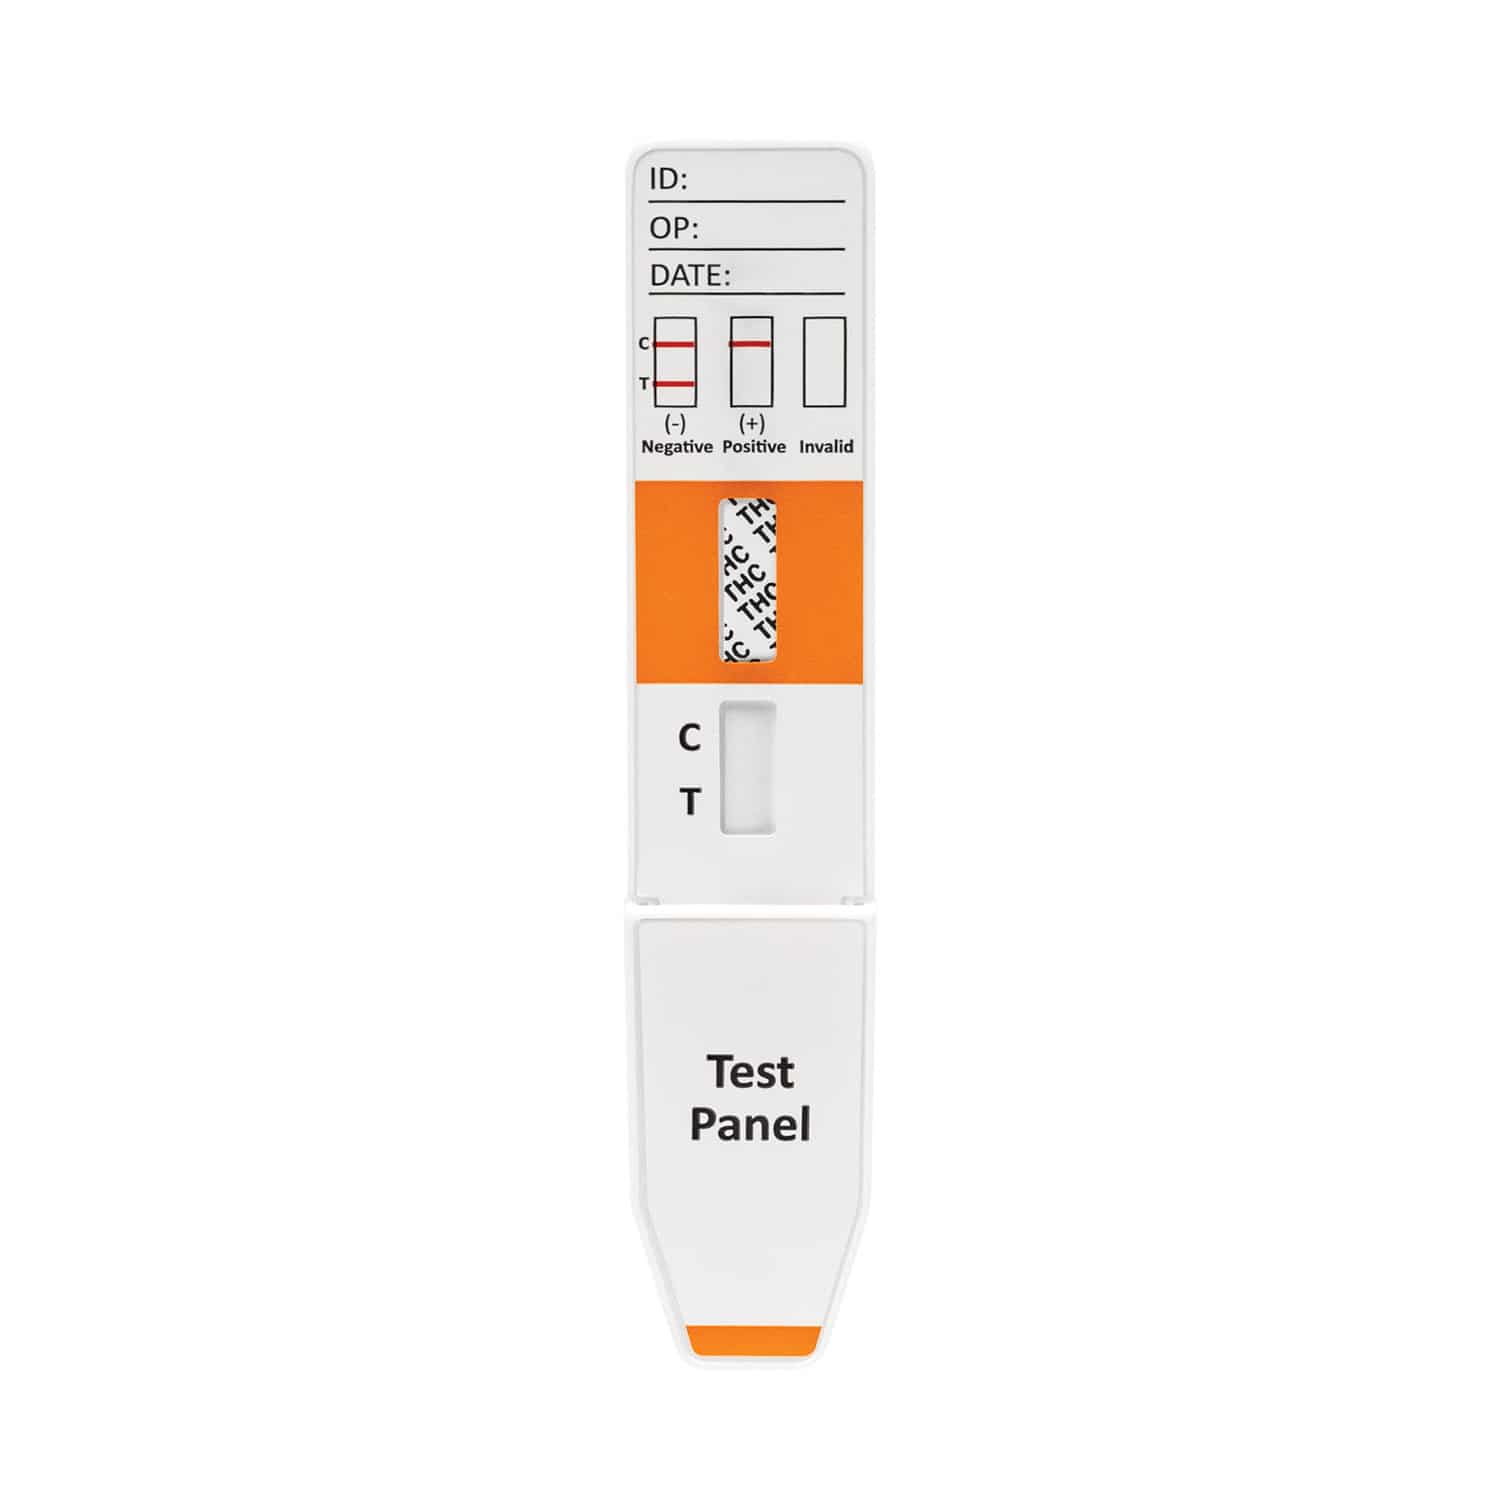 Surestep™ Powder Test Drug Screen Panel (Lsd) - (Image Differs From Product)